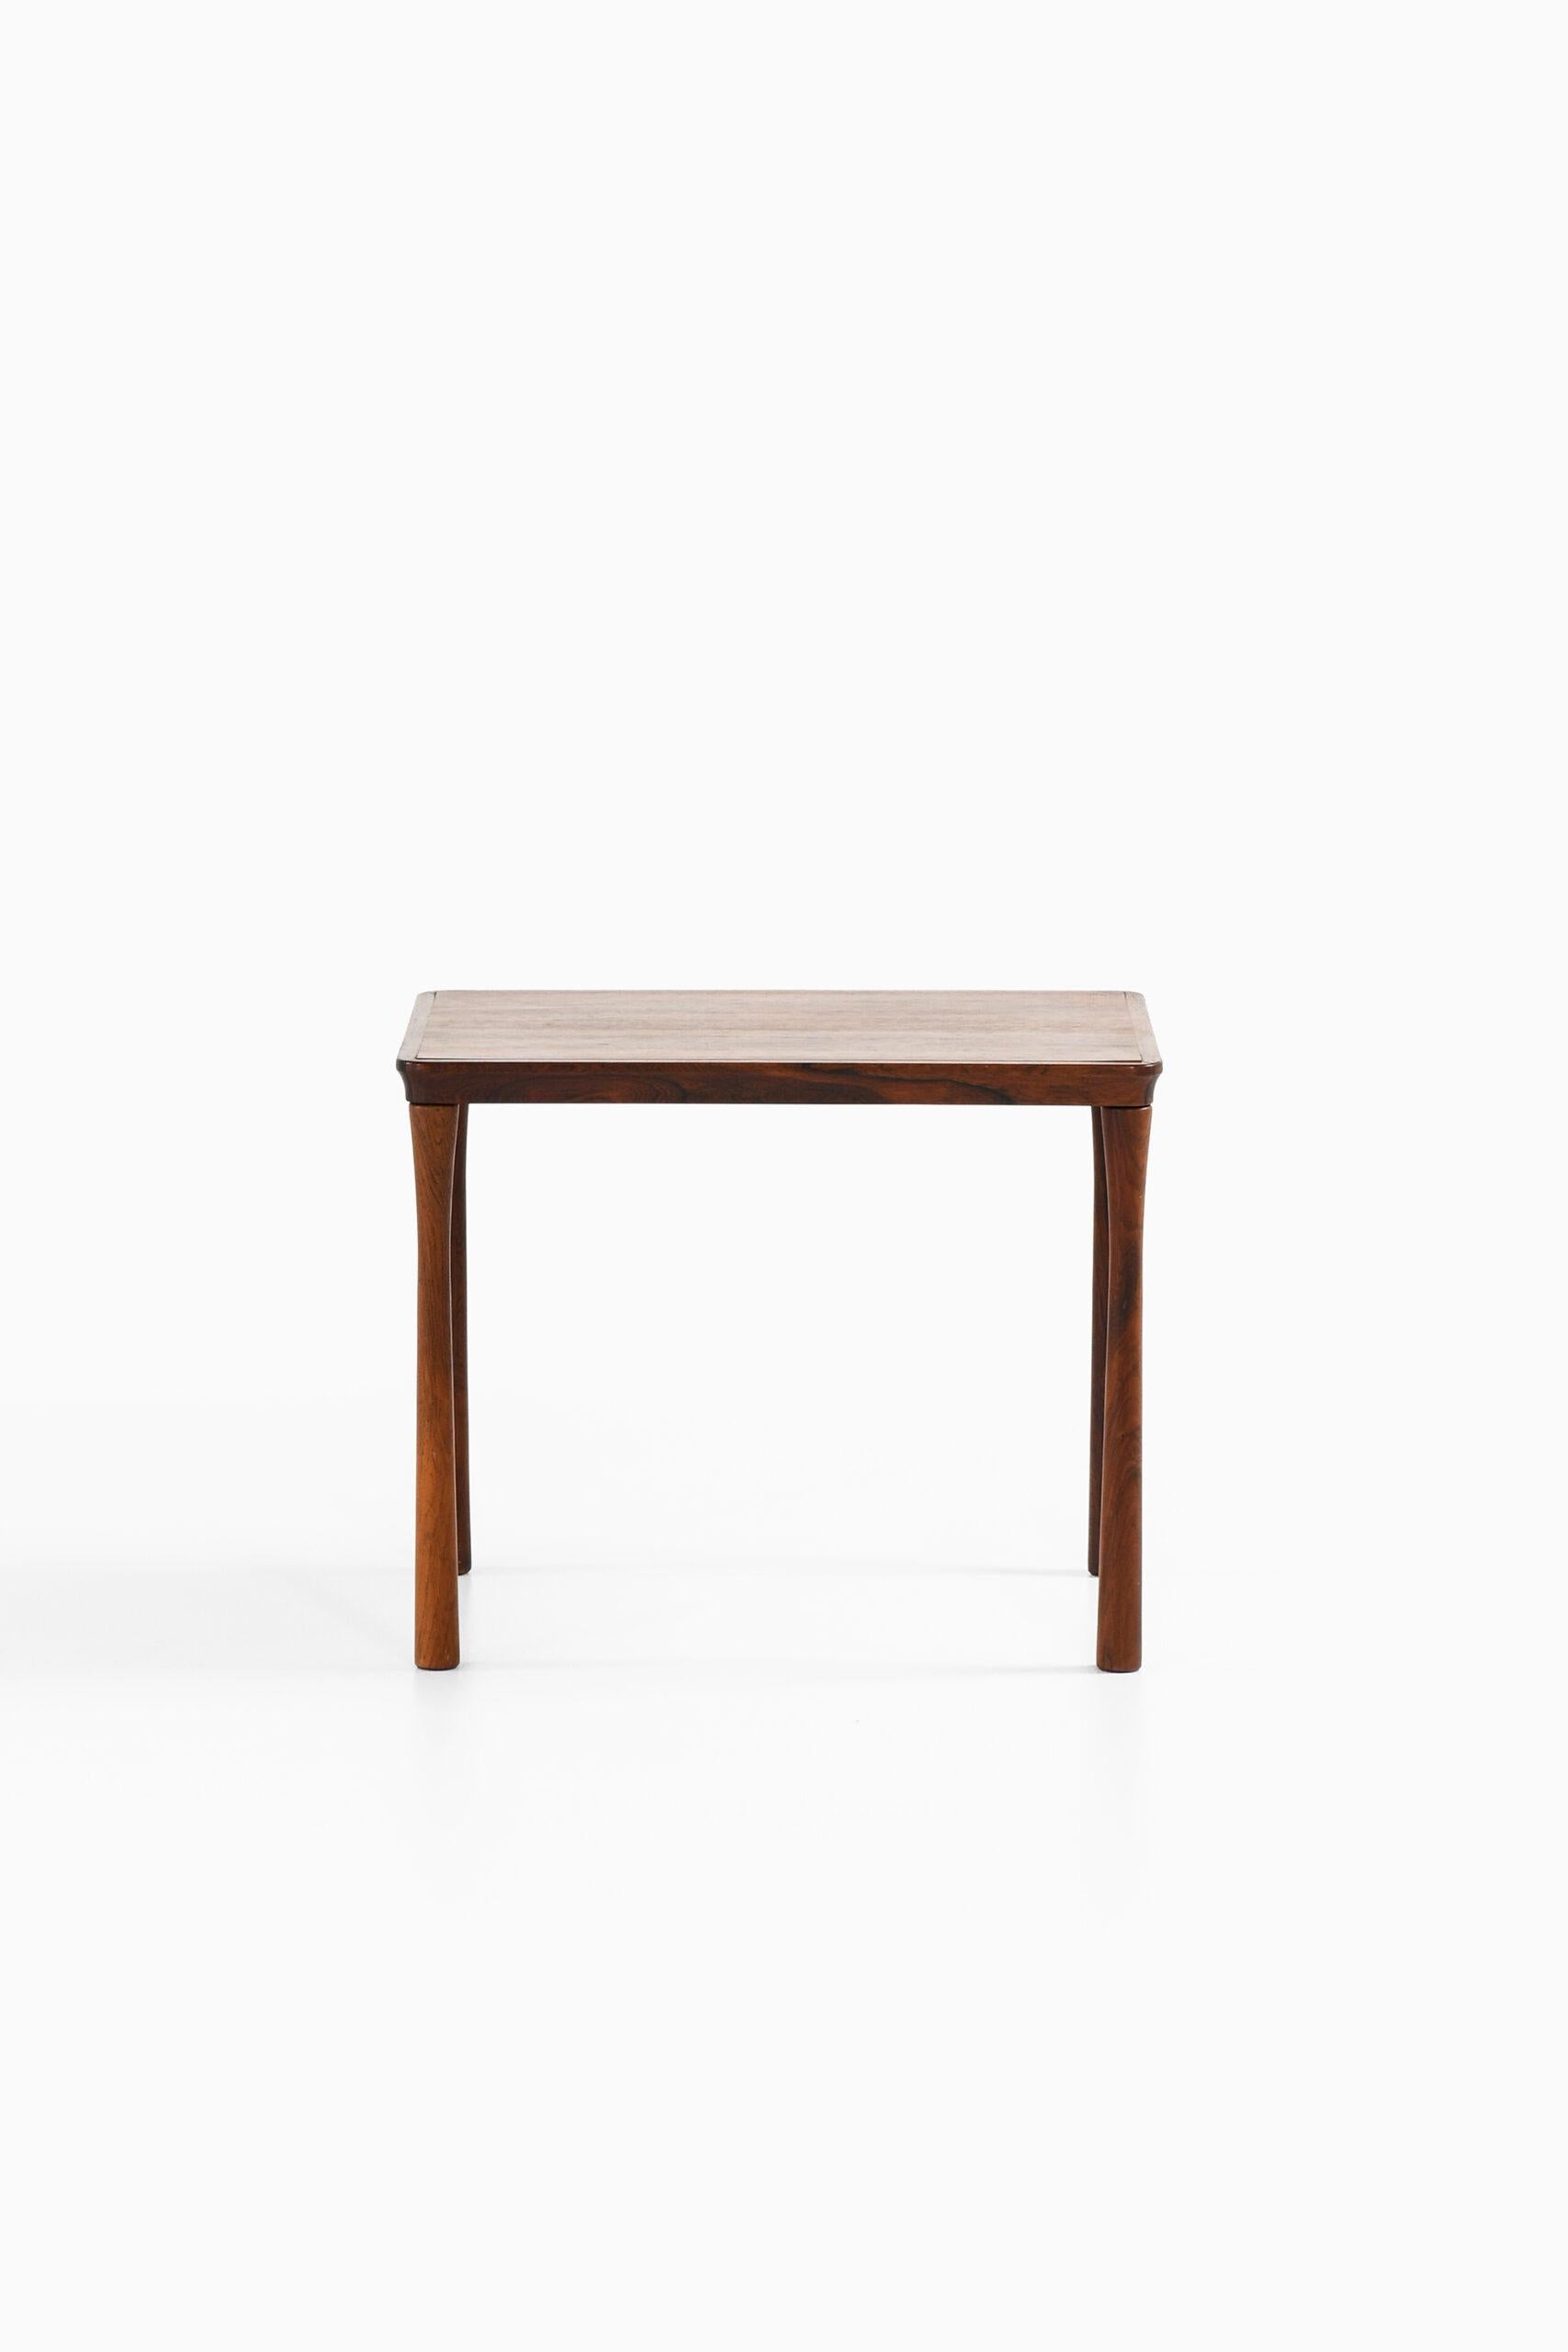 Rare side table model Colorado designed by Folke Ohlsson. Produced by Tingströms in Sweden.